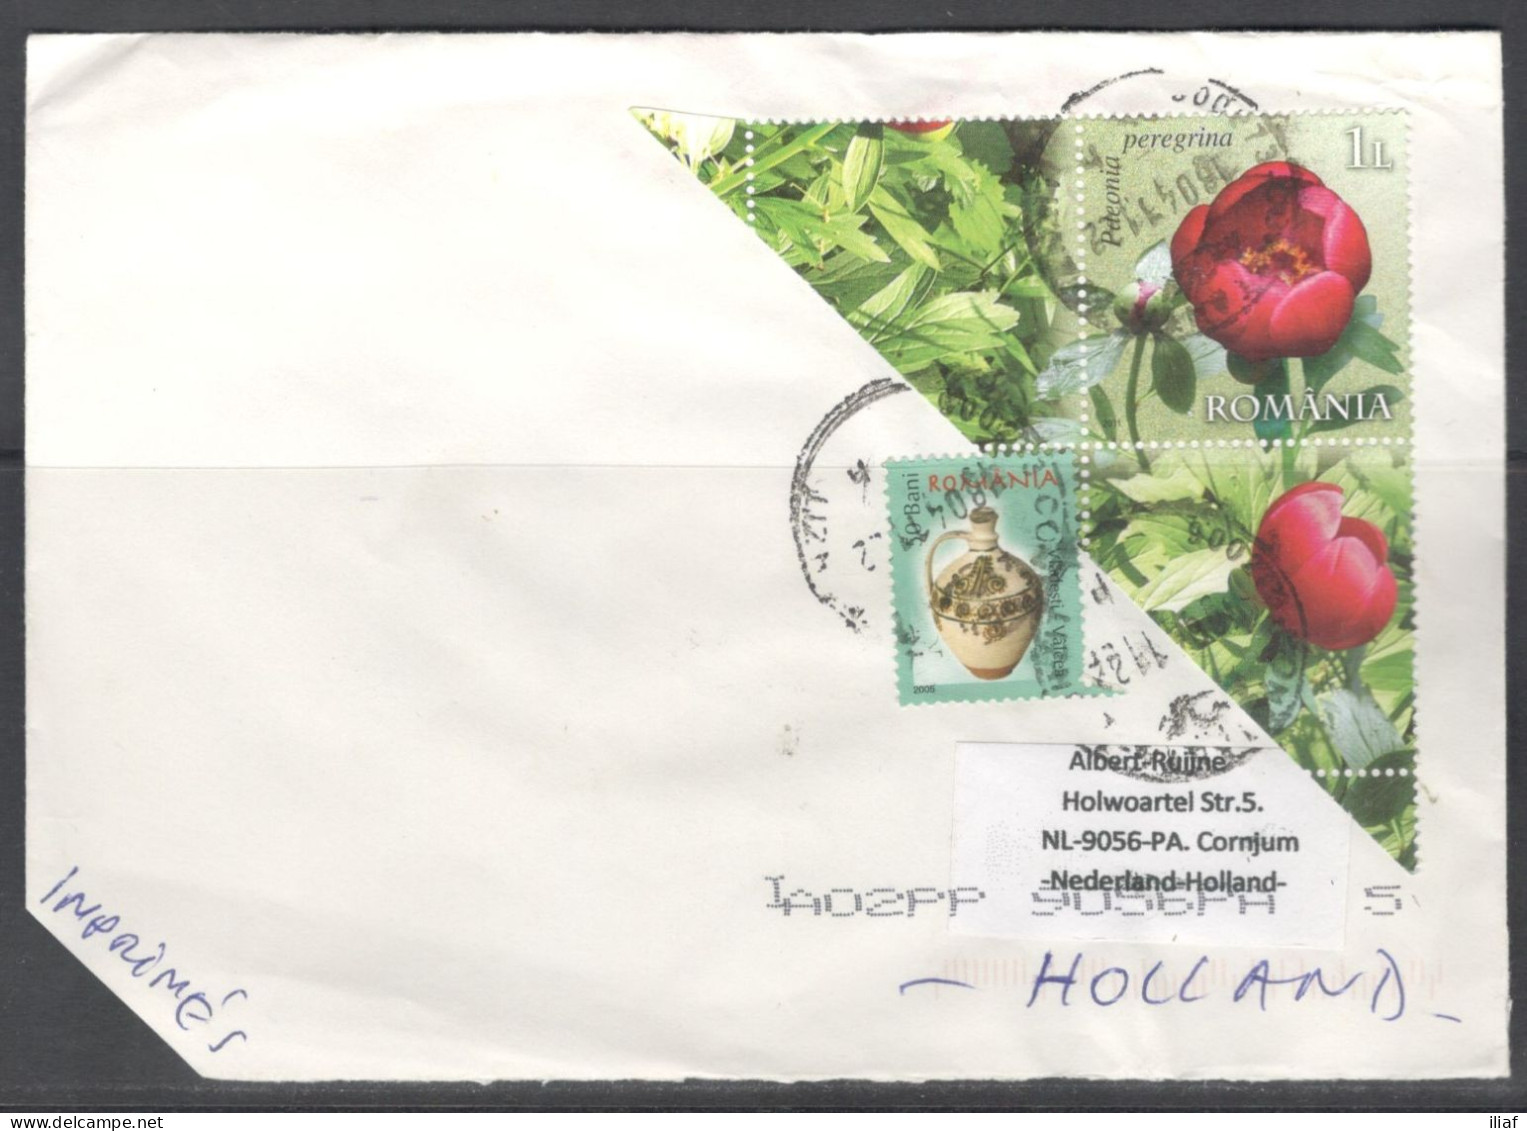 Romania. Stamps Mi. 6507, 6007 On Letter, Sent From Constanta On 18.04.2011 To Nederland. - Briefe U. Dokumente